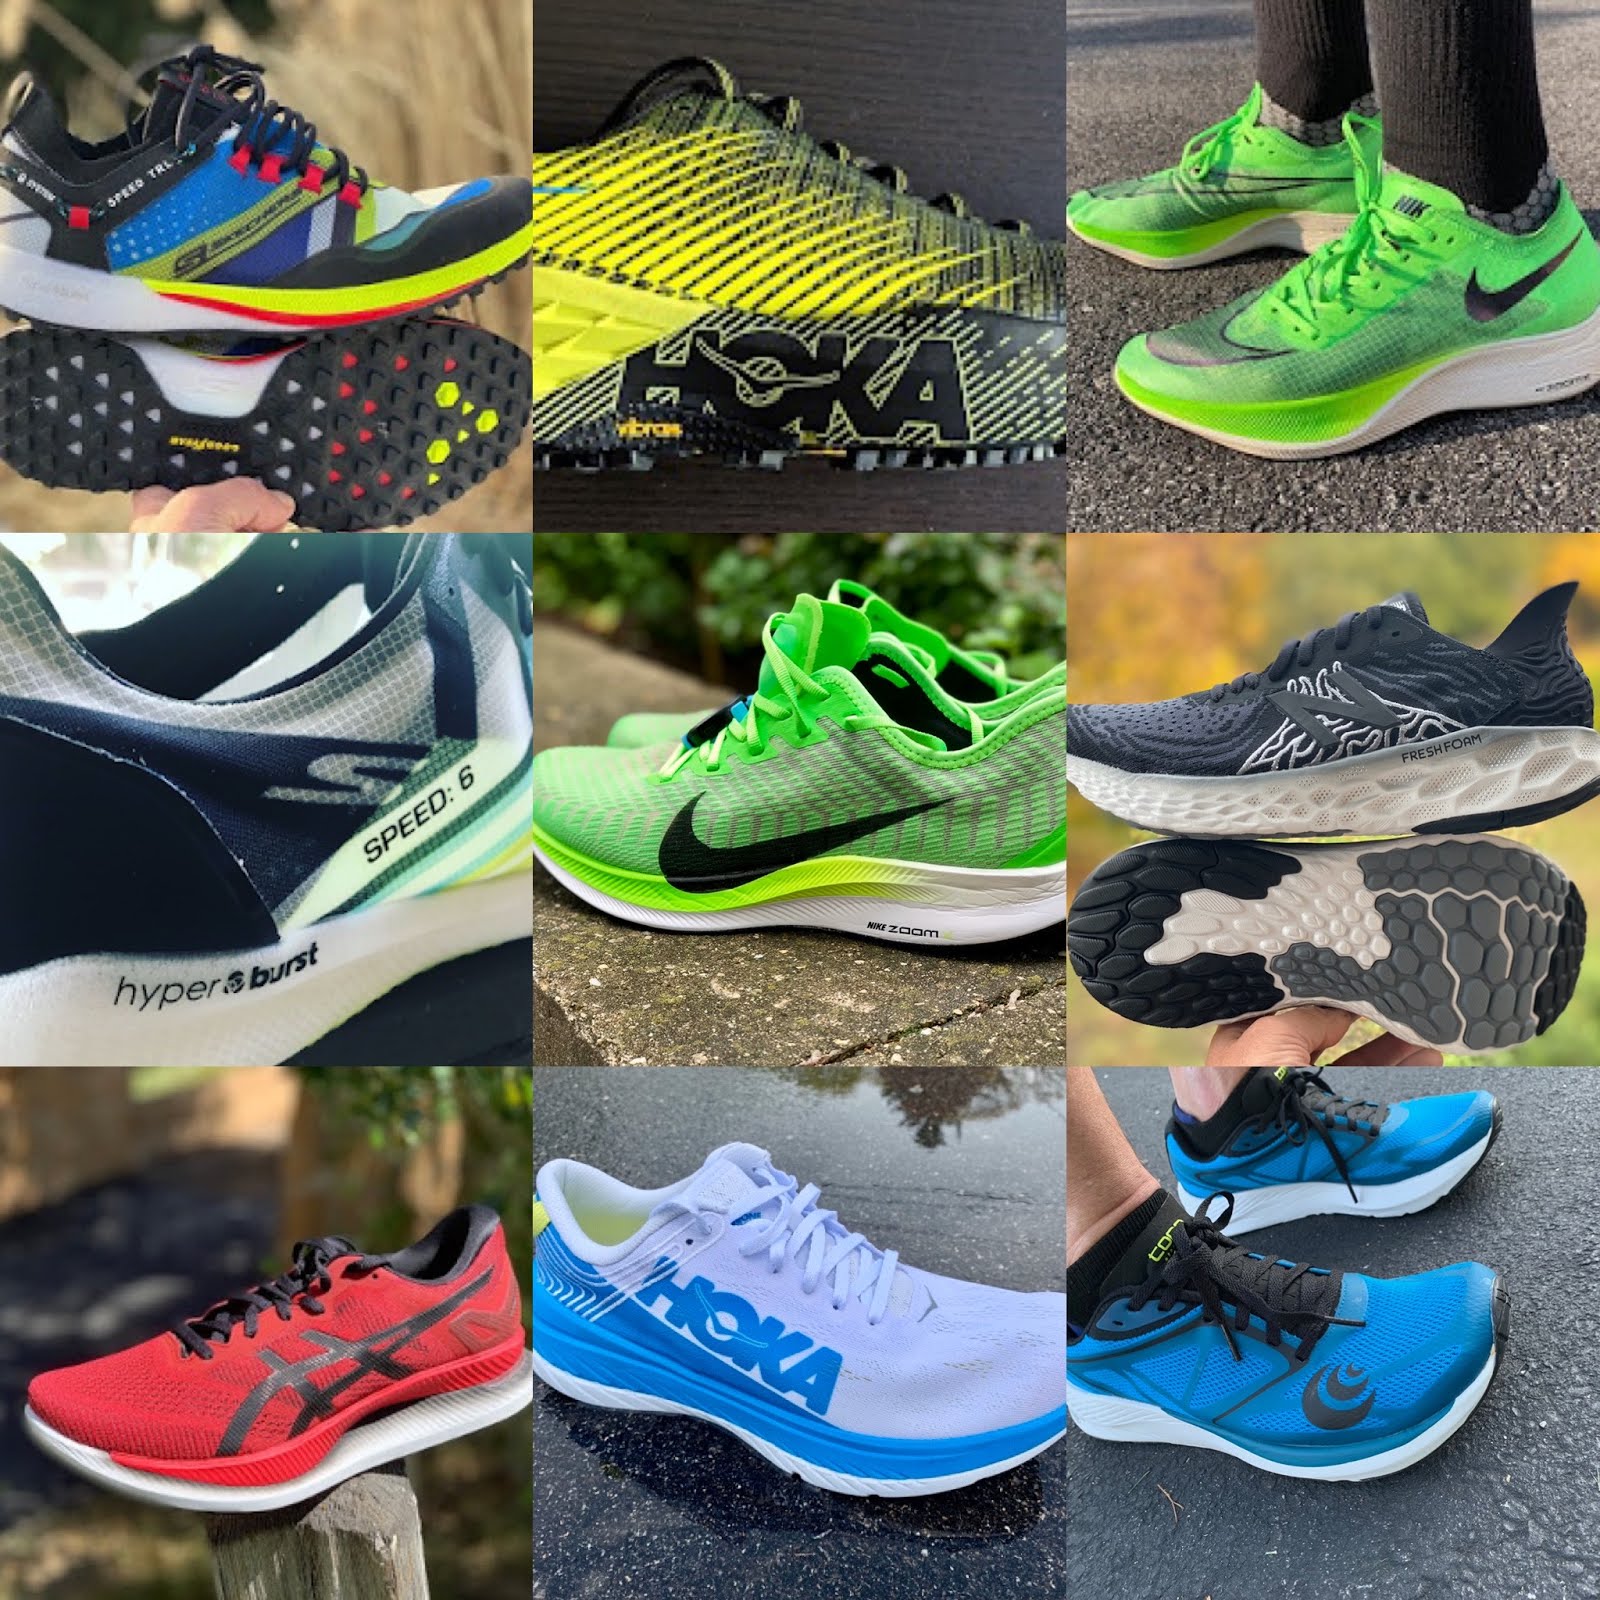 Road Trail Run: Best Run Shoes and Gear of 2019!